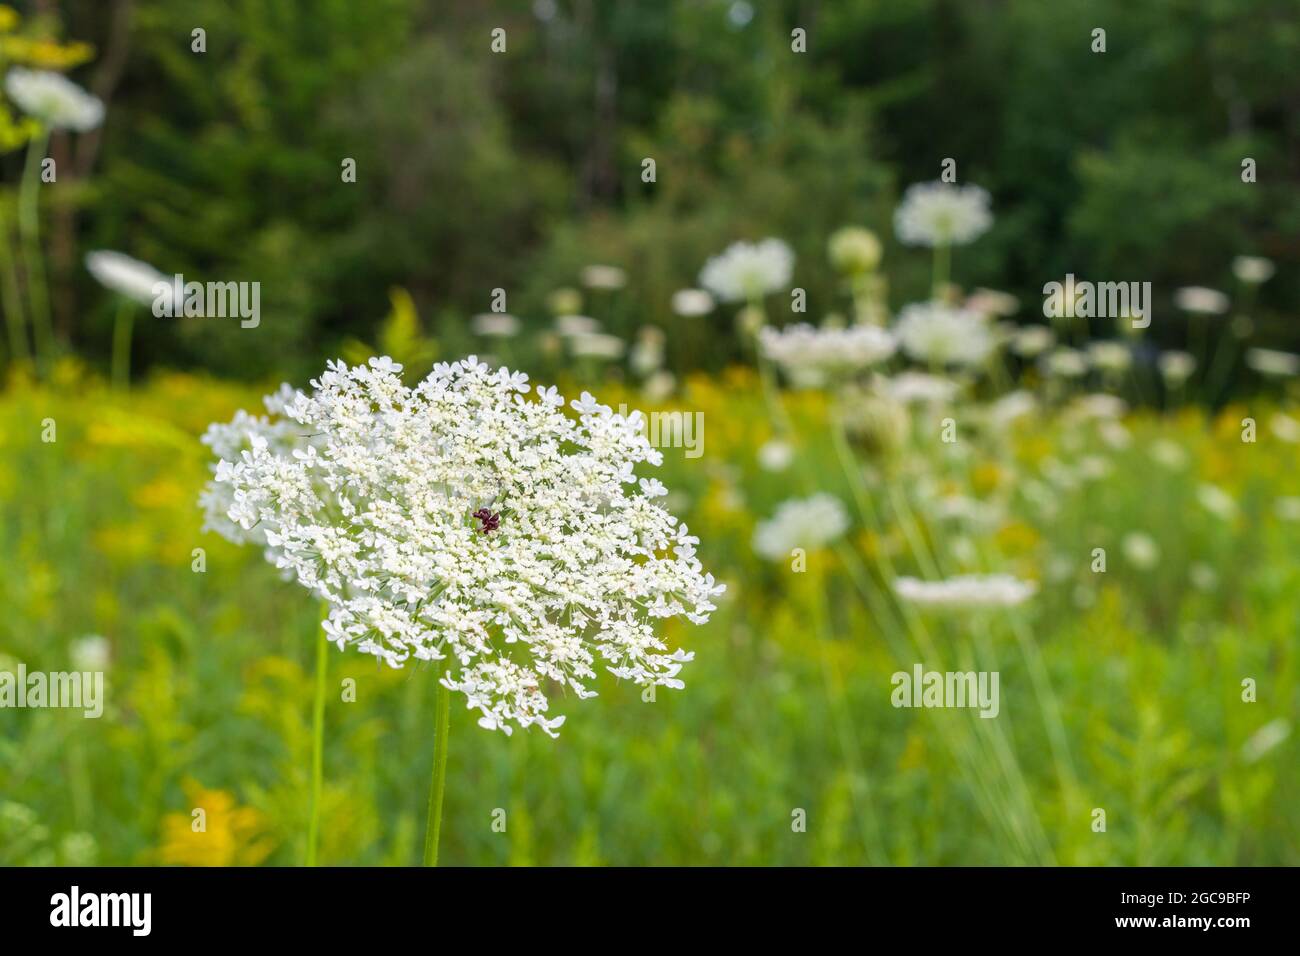 Queen Anne's Lace or wild carrot (Daucus carota) flowers in a wildflower field. Stock Photo